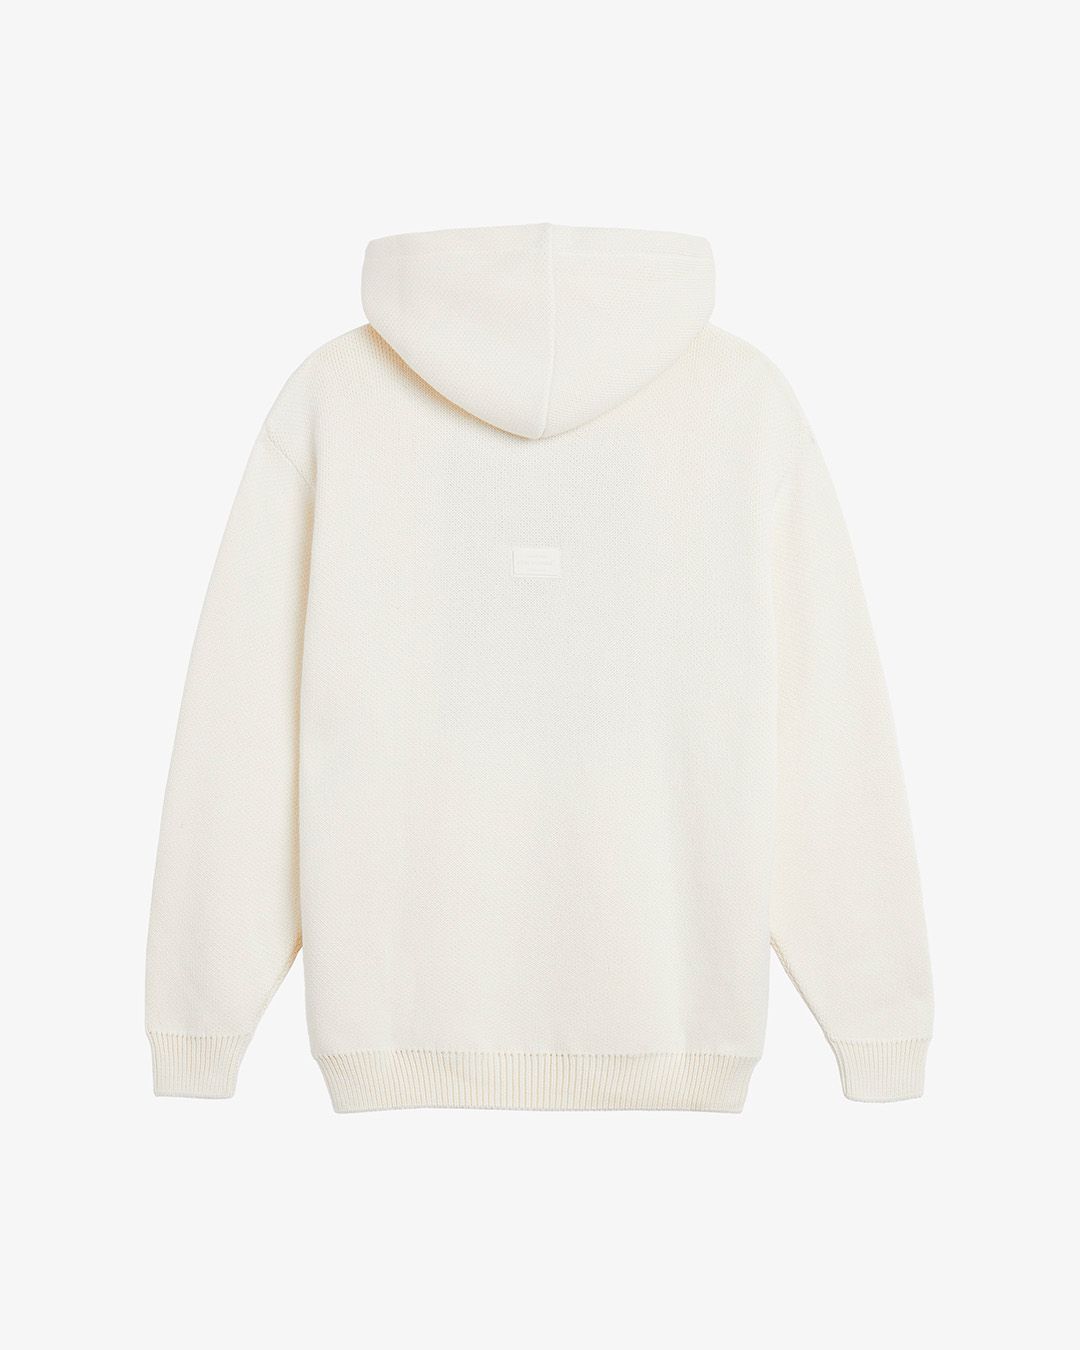 The Knitted Hoodie | c'est normal - Around here.